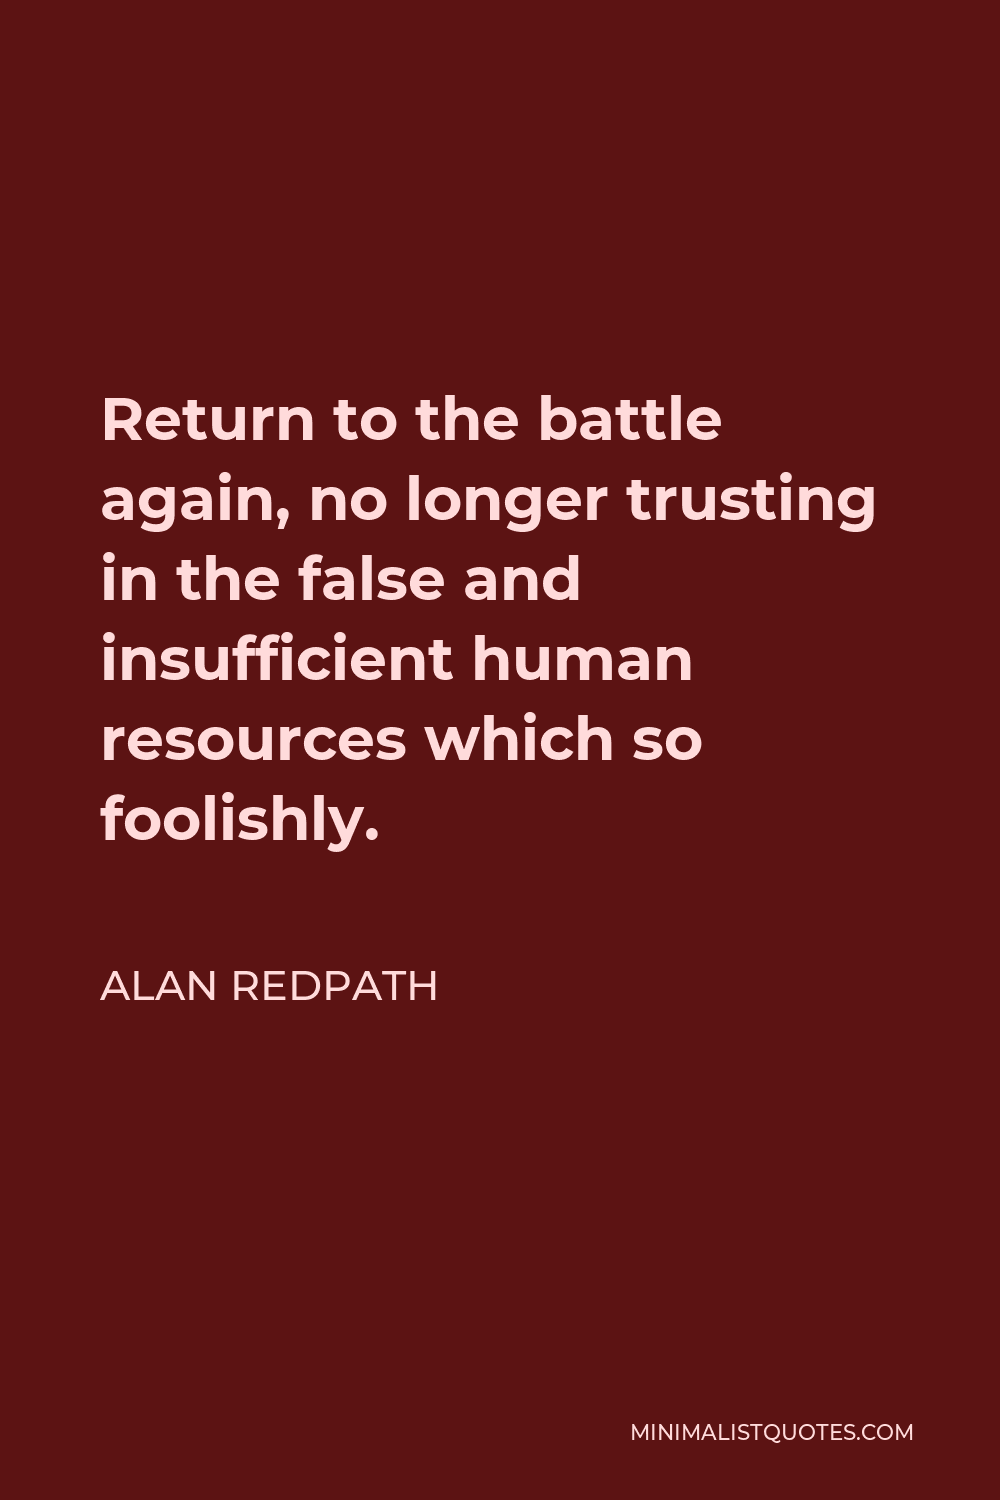 Alan Redpath Quote - Return to the battle again, no longer trusting in the false and insufficient human resources which so foolishly.